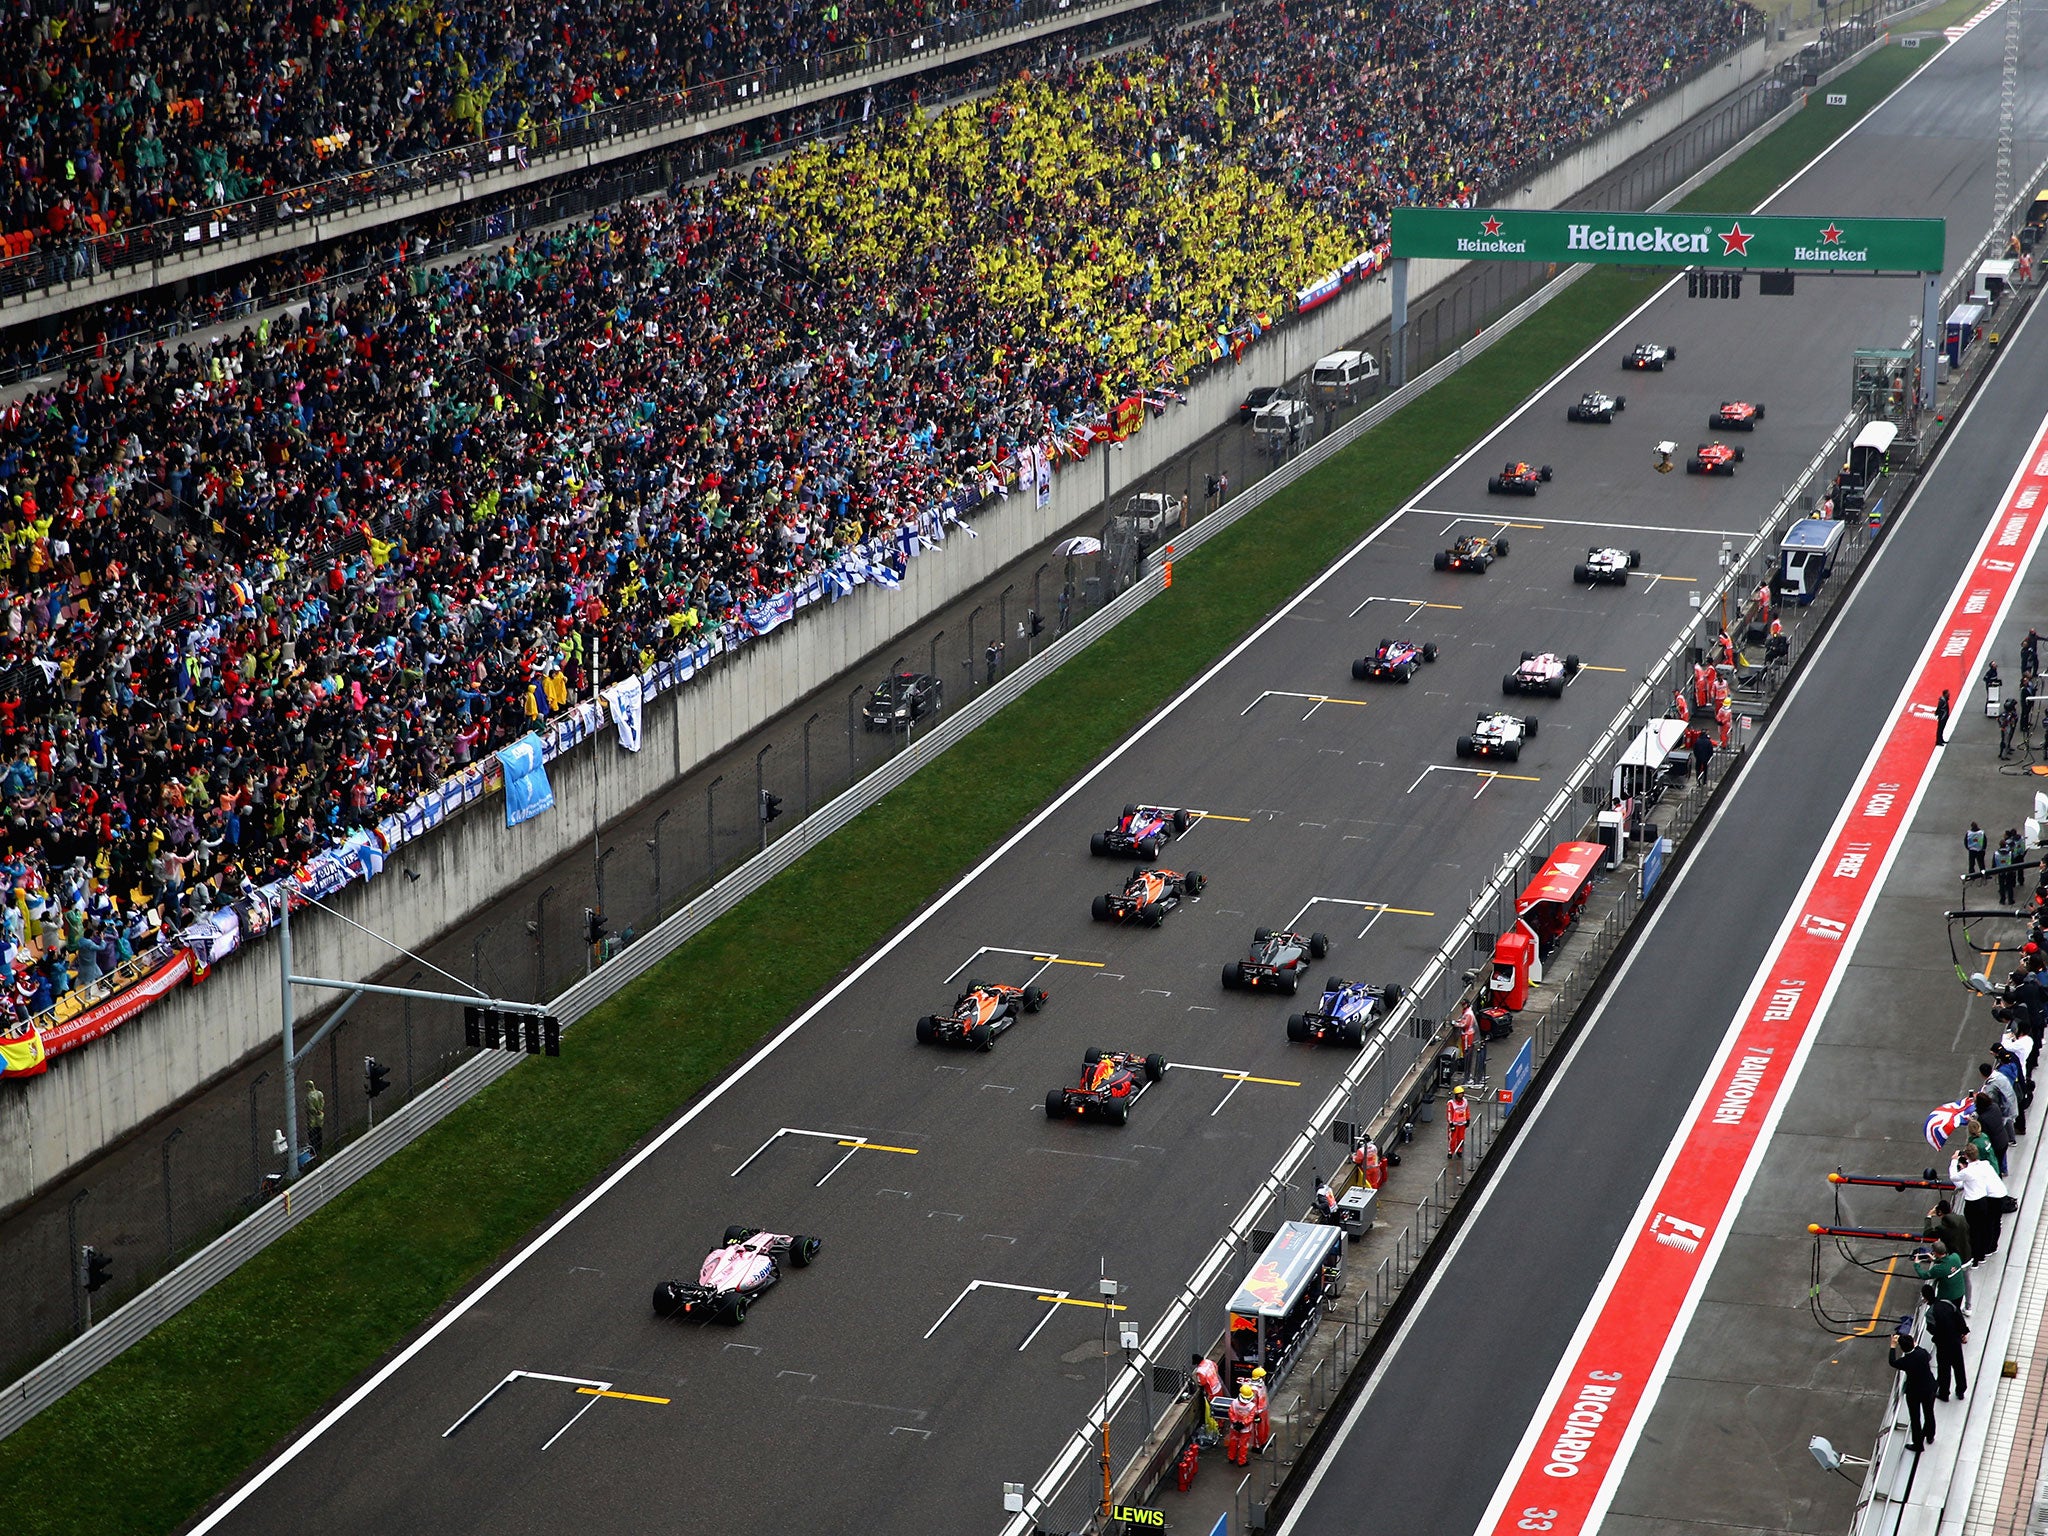 The start of the Chinese Grand Prix saw the rare sight of a standing grid in wet conditions